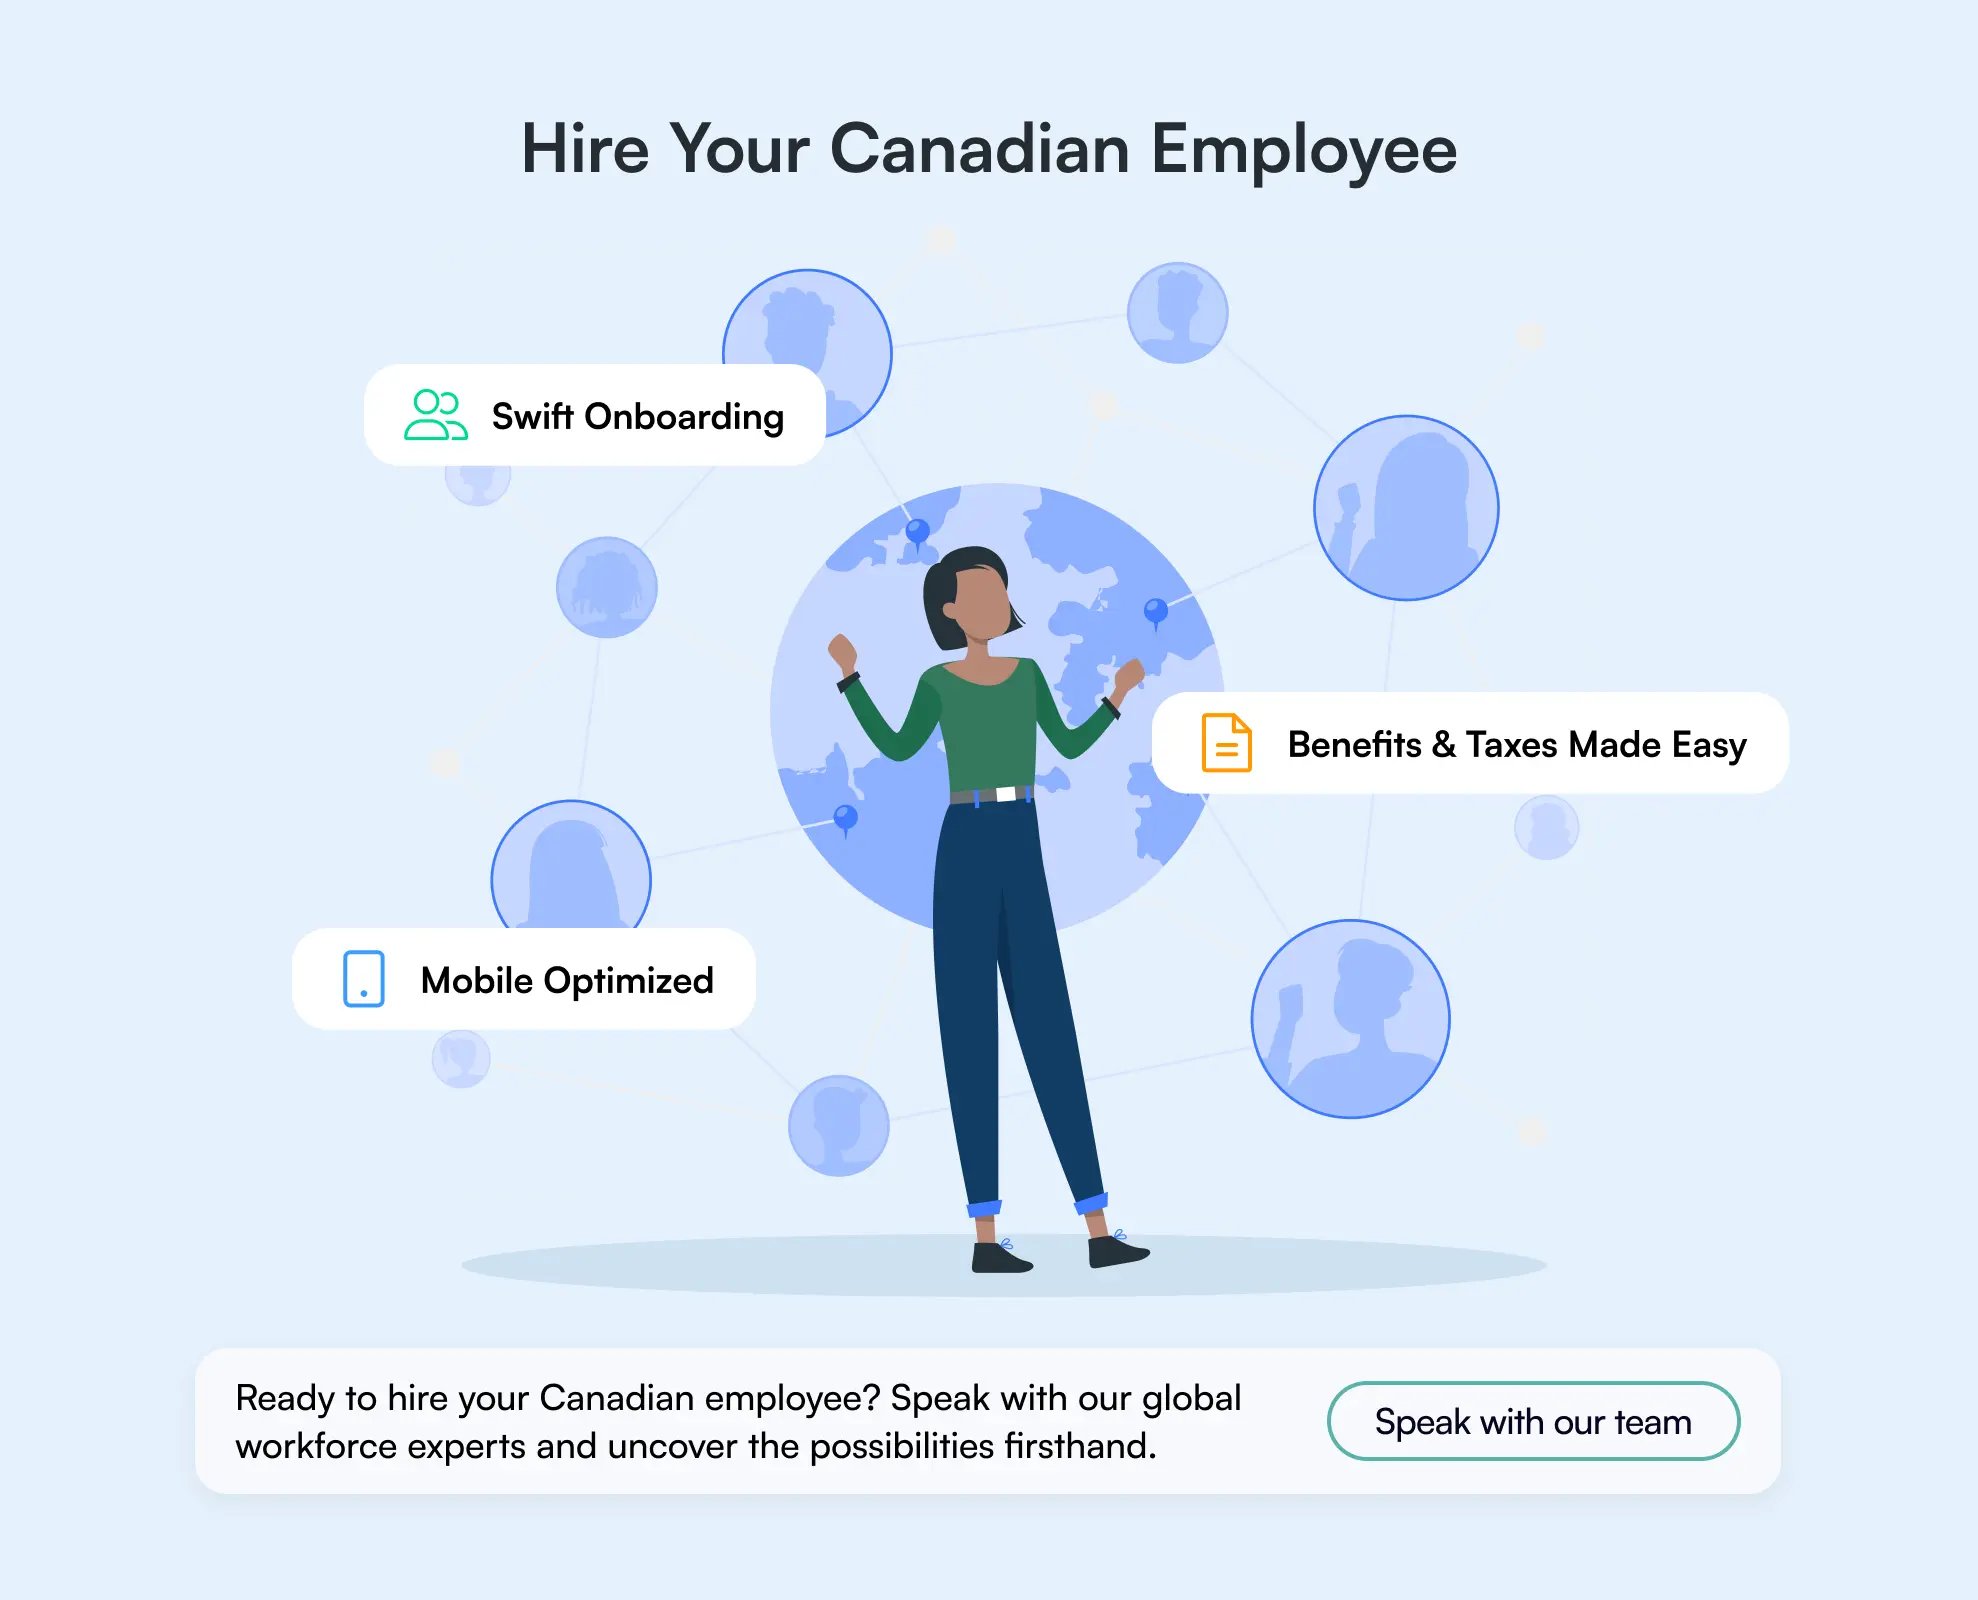 Hire your Canadian employee